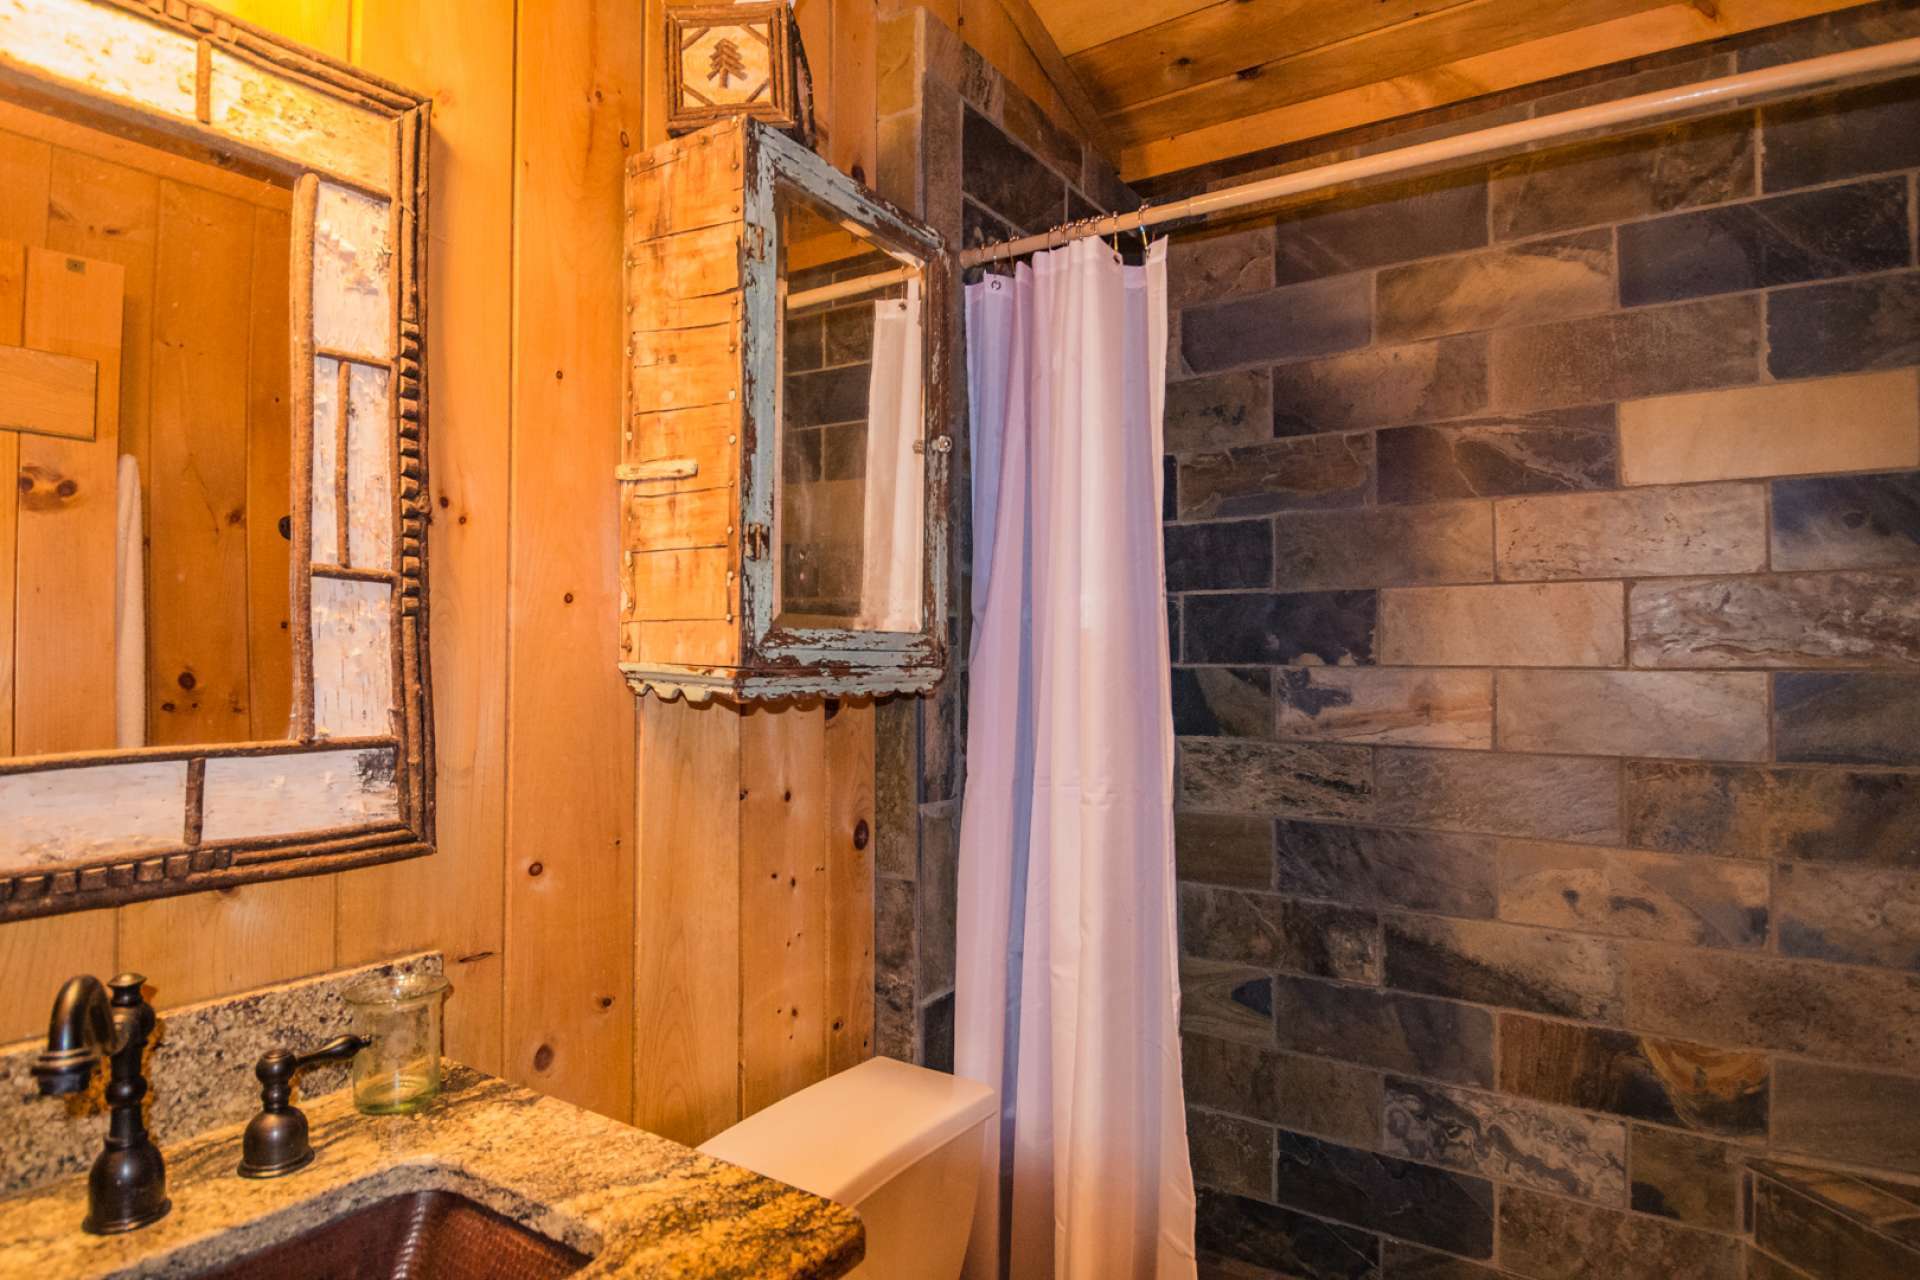 The main level full bath features a one-of-a-kind wormy chestnut vanity with copper sink and granite top, and a tiled walk-in shower. The laundry closet is also located on the main level.